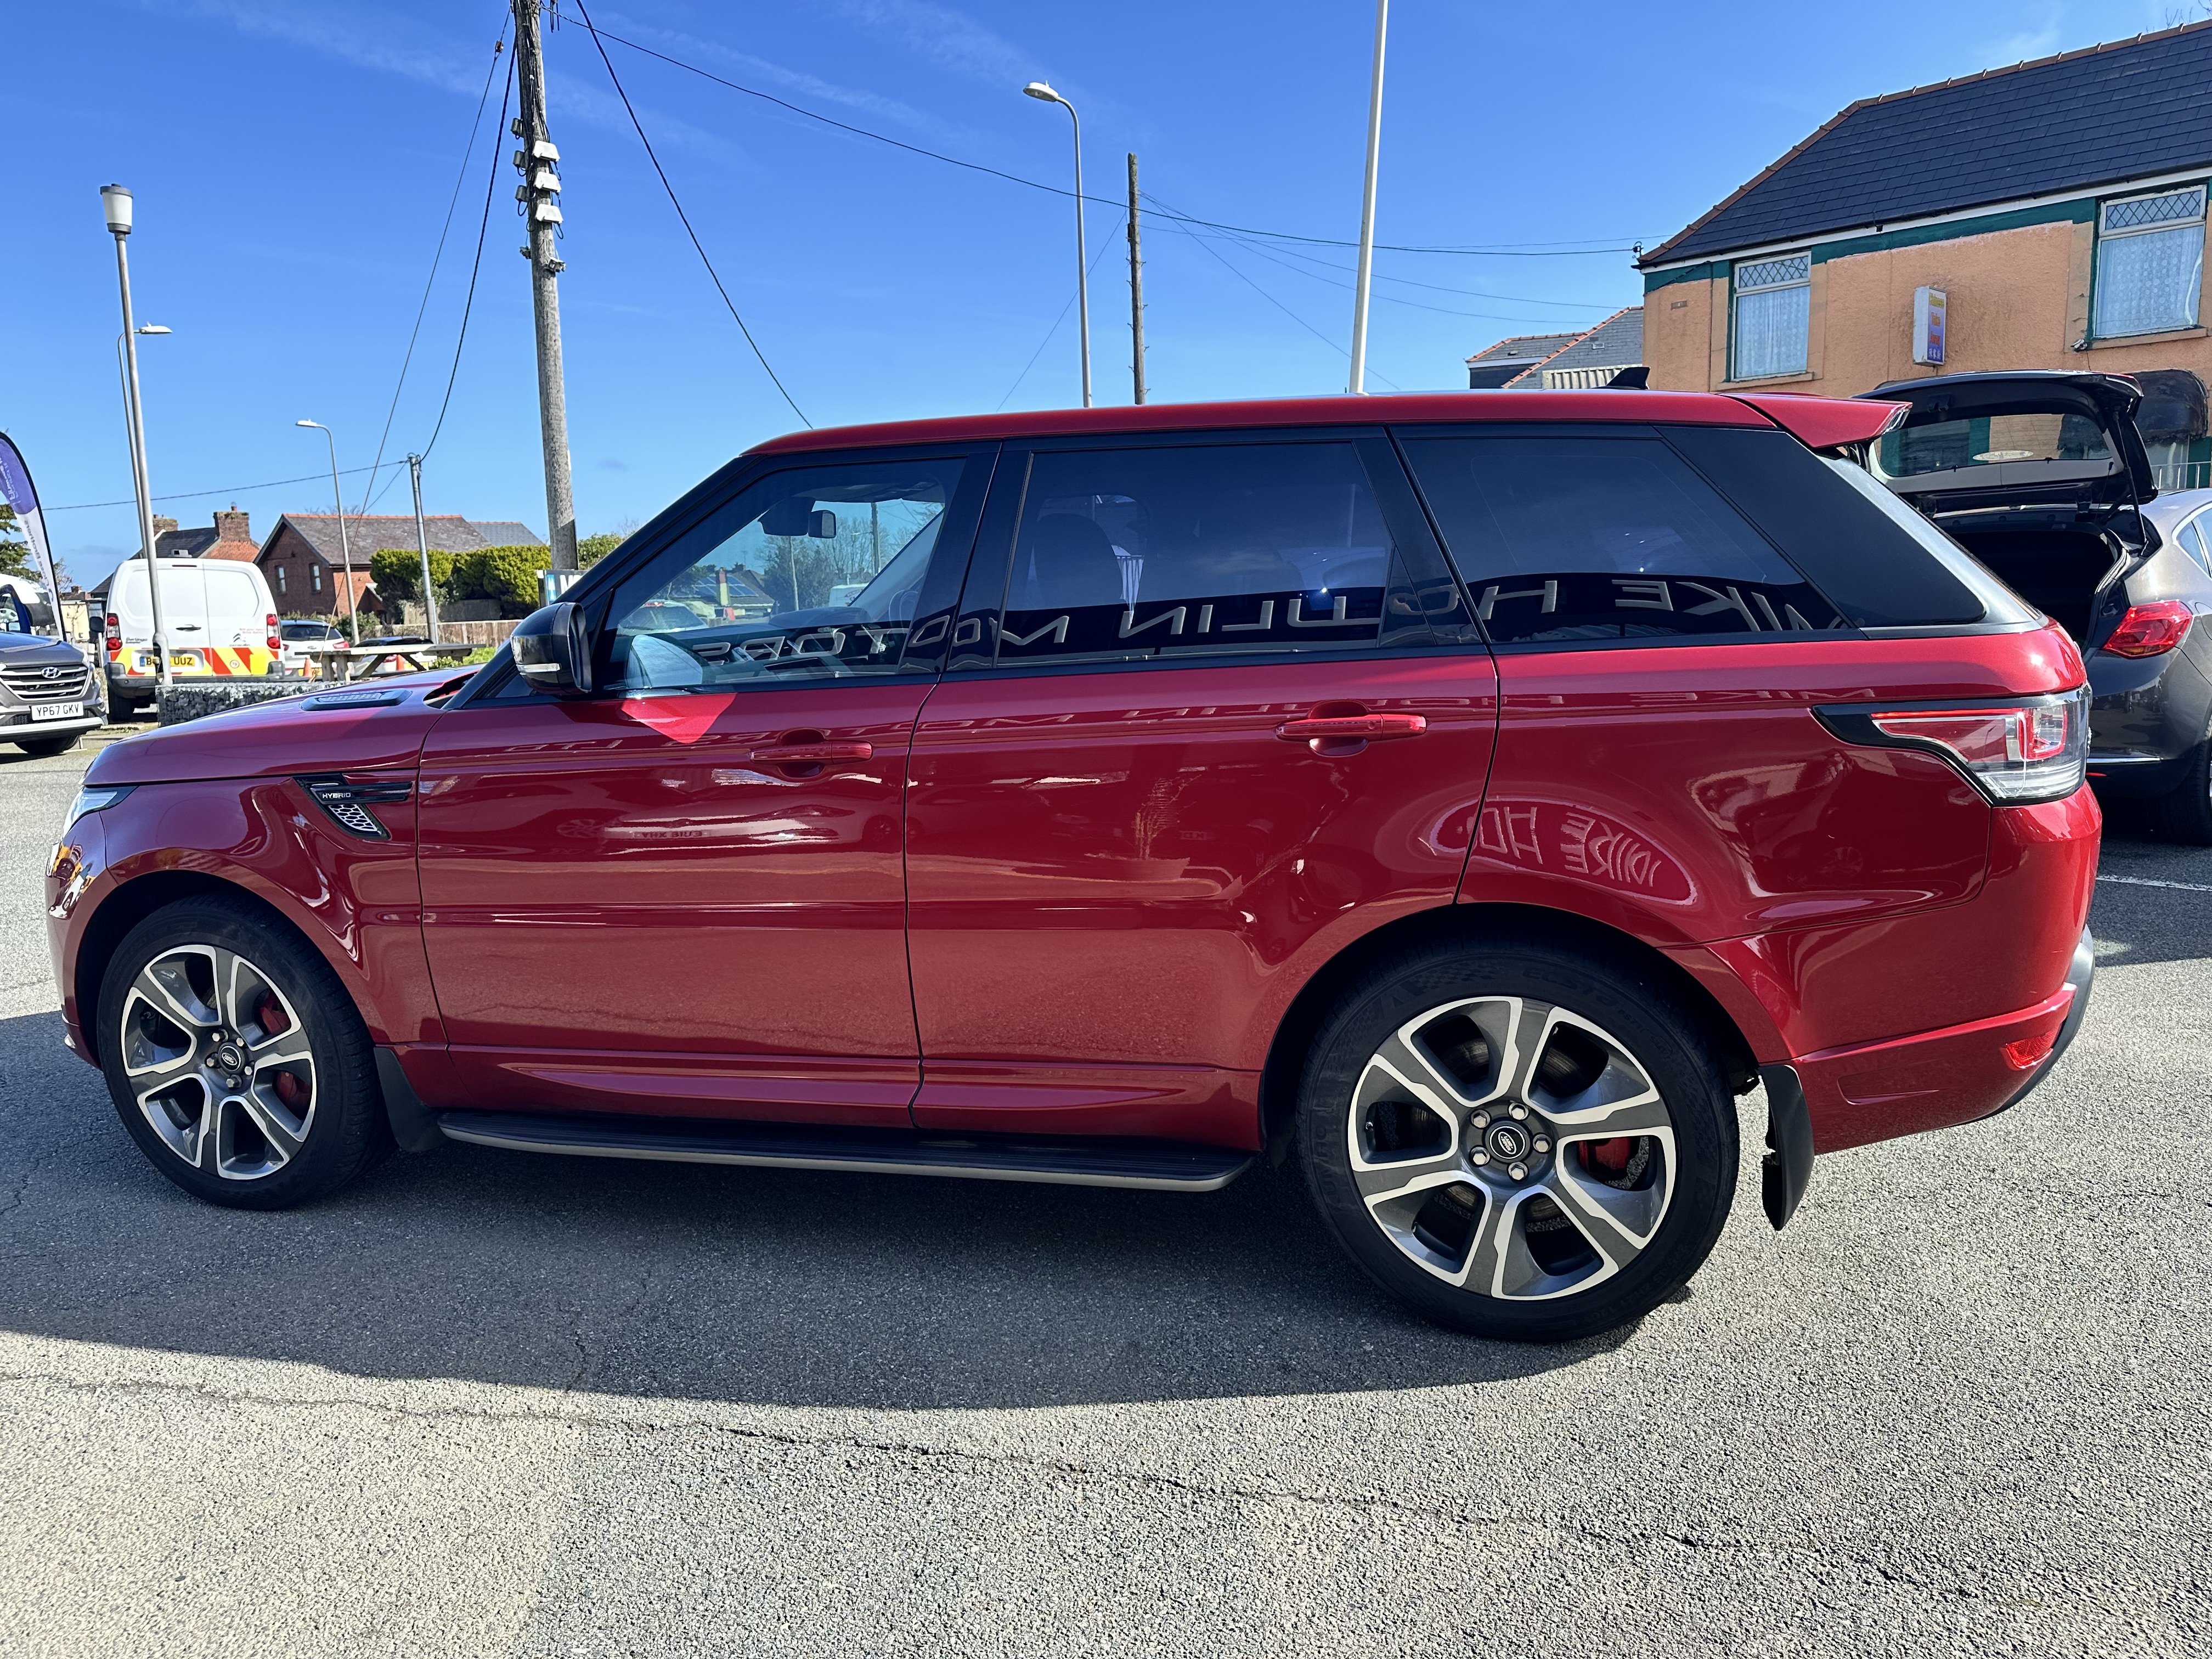 Land Rover RANGE ROVER SPORT AUTOBIOGRAPHY HYBRID for sale at Mike Howlin Motor Sales Pembrokeshire